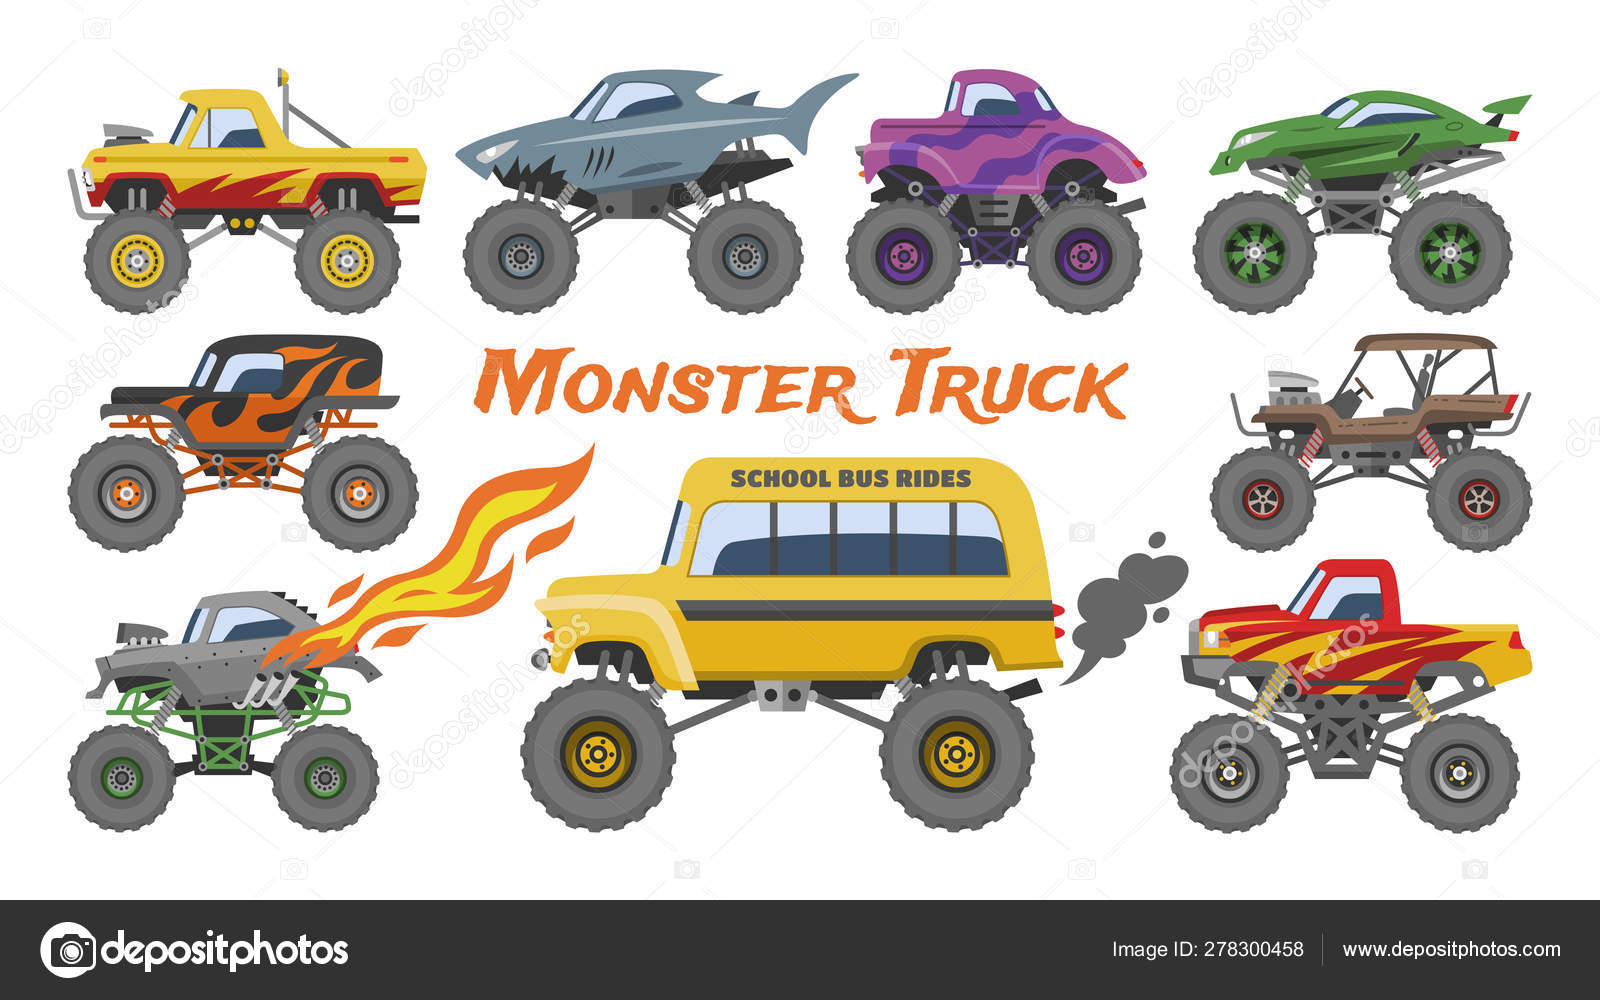 Cartoon Monster Truck Isolated on White Background, Vectors